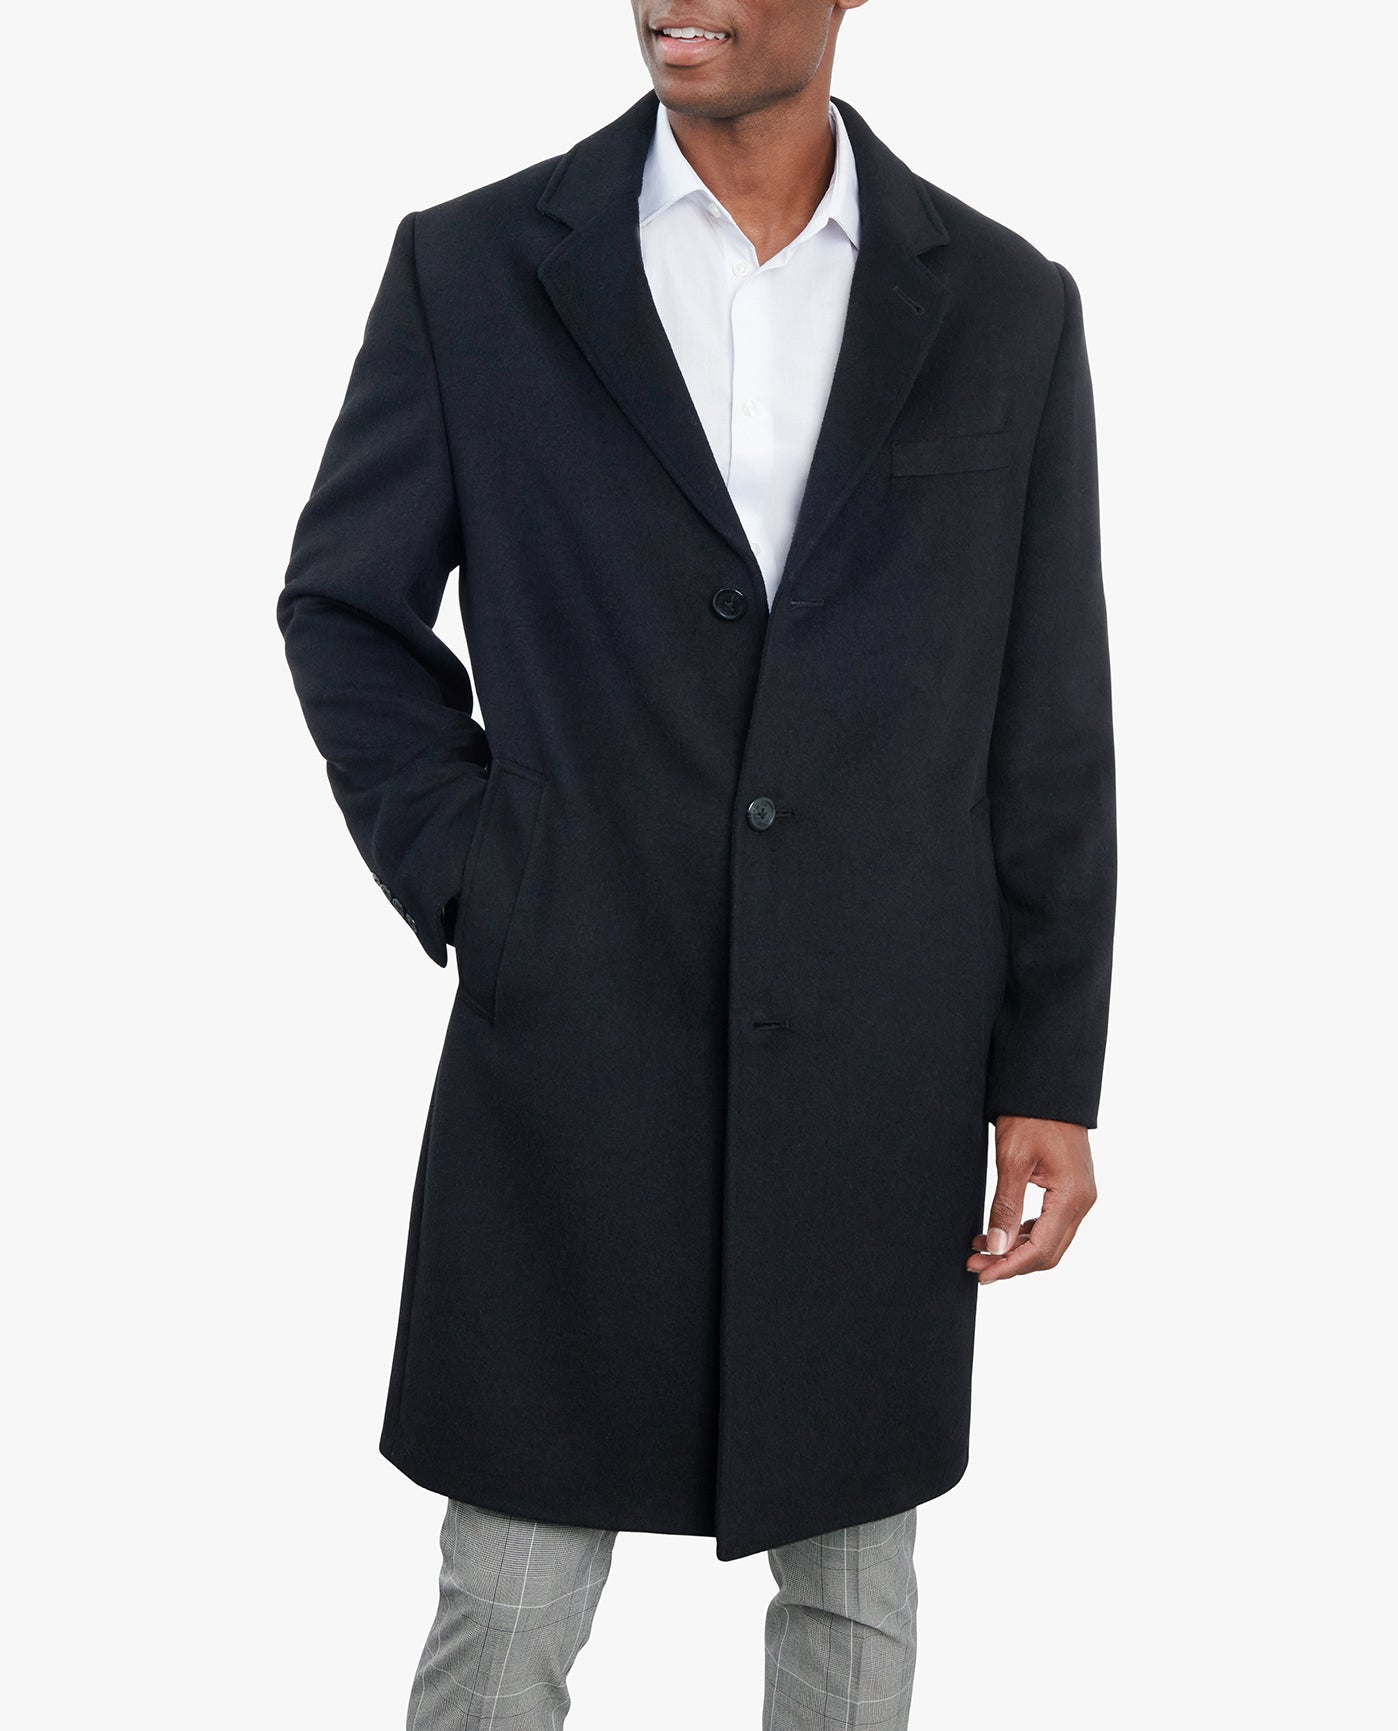 FRONT VIEW OF SIGNATURE 42" SINGLE BREASTED WOOL JACKET | BLACK